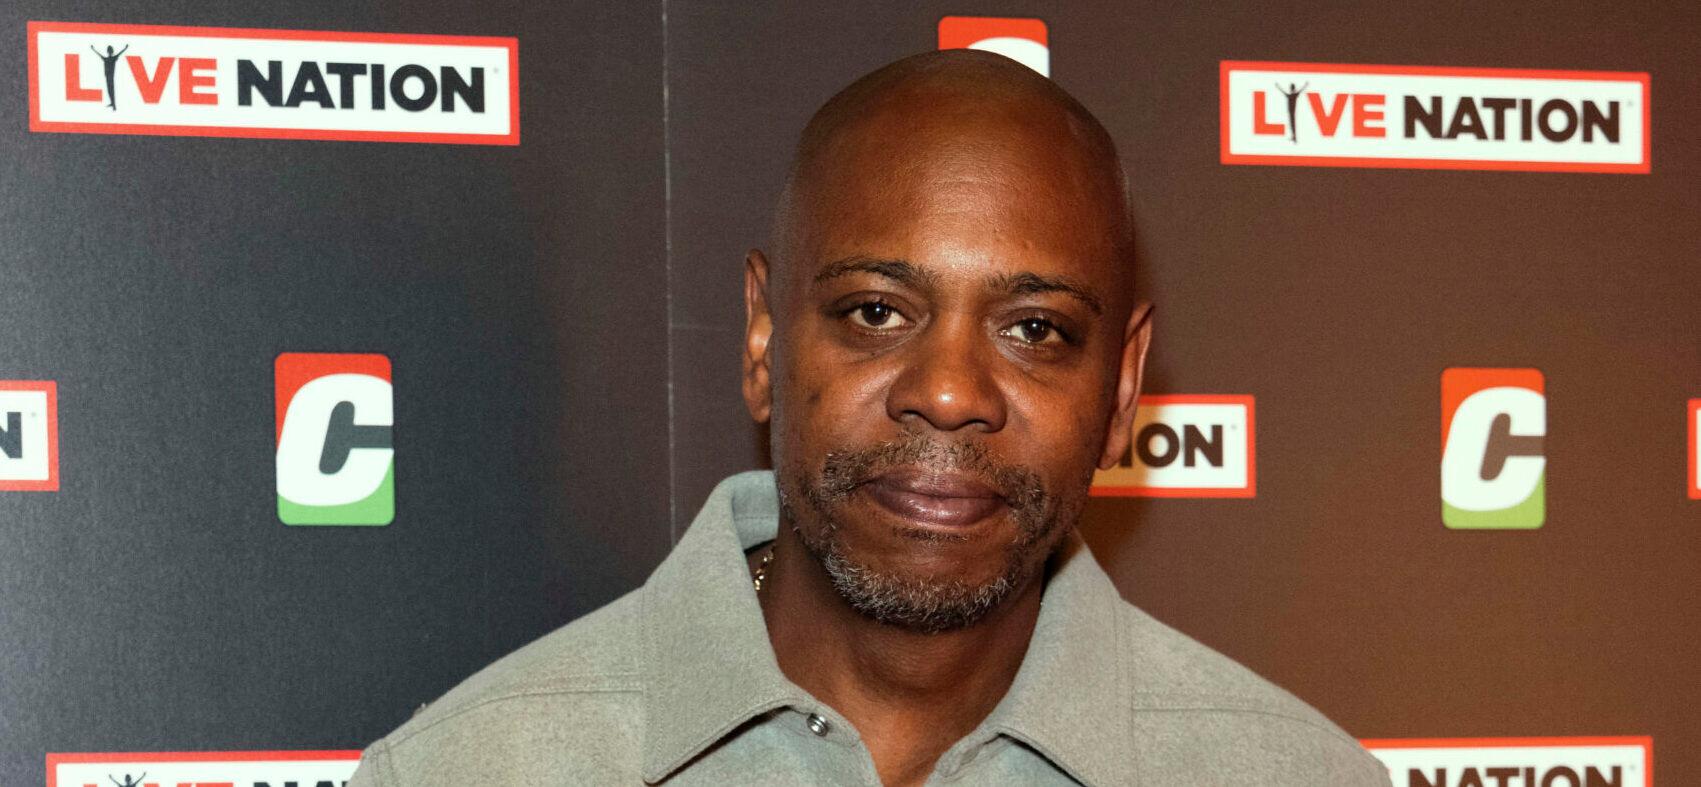 Dave Chappelle Kicks Off New Netflix Special By Attacking Trans People Despite Past Backlash